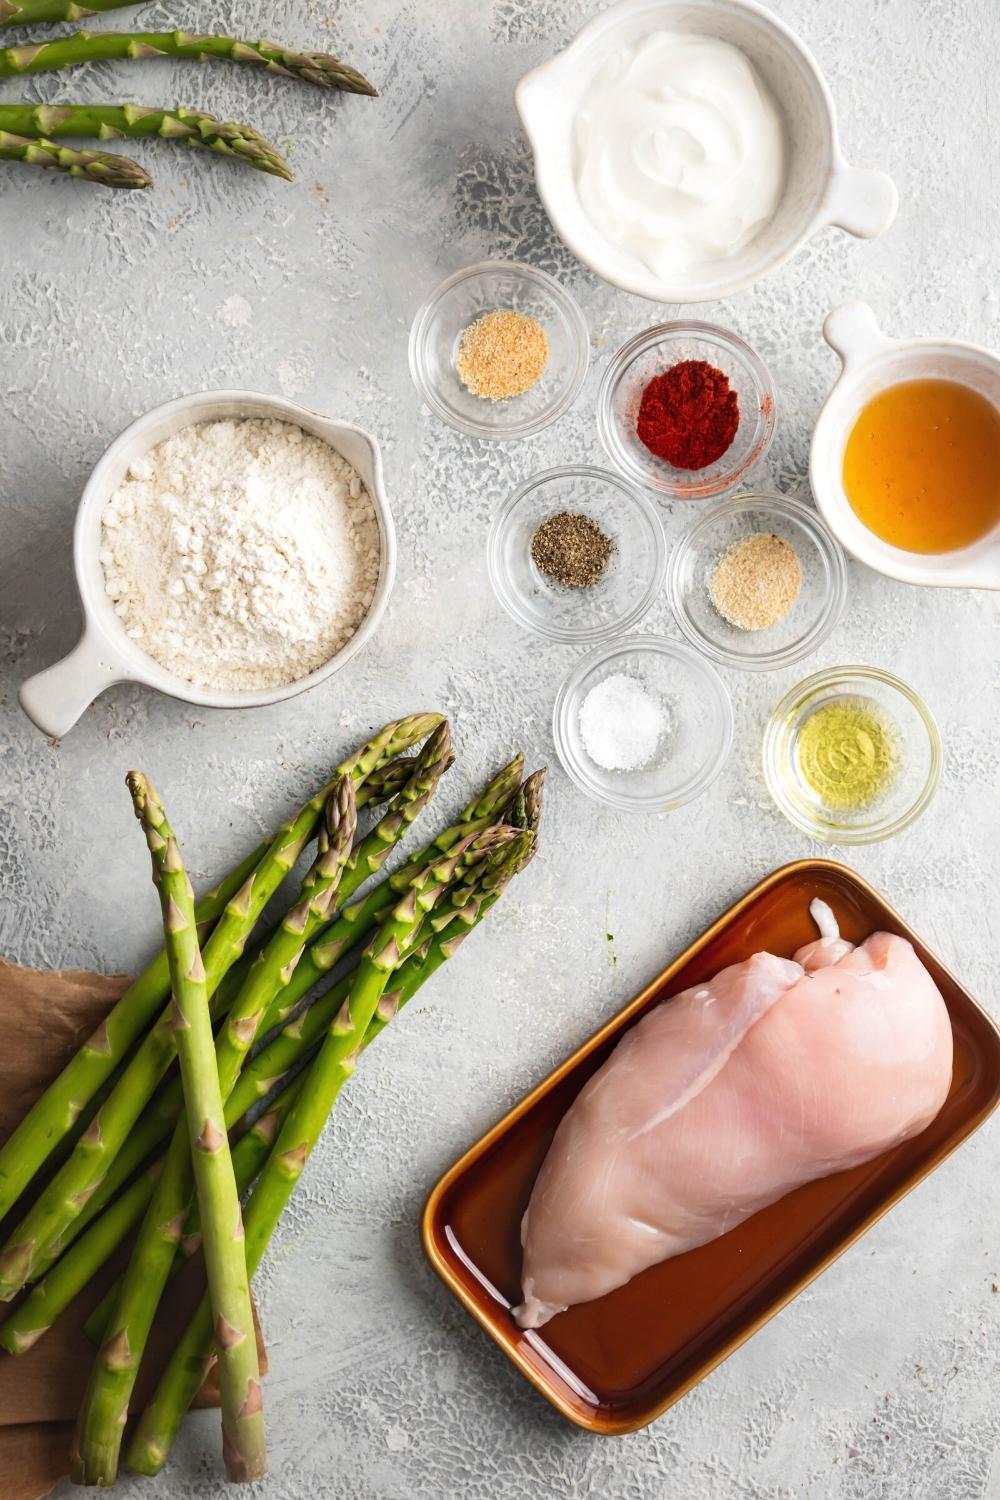 A chicken breast, a few spears of asparagus, a cup of garlic powder, cup of oil, a cup of paprika, cup of onion powder, Balflour, ball buttermilk, and a bowl truffle honey on a gray counter.